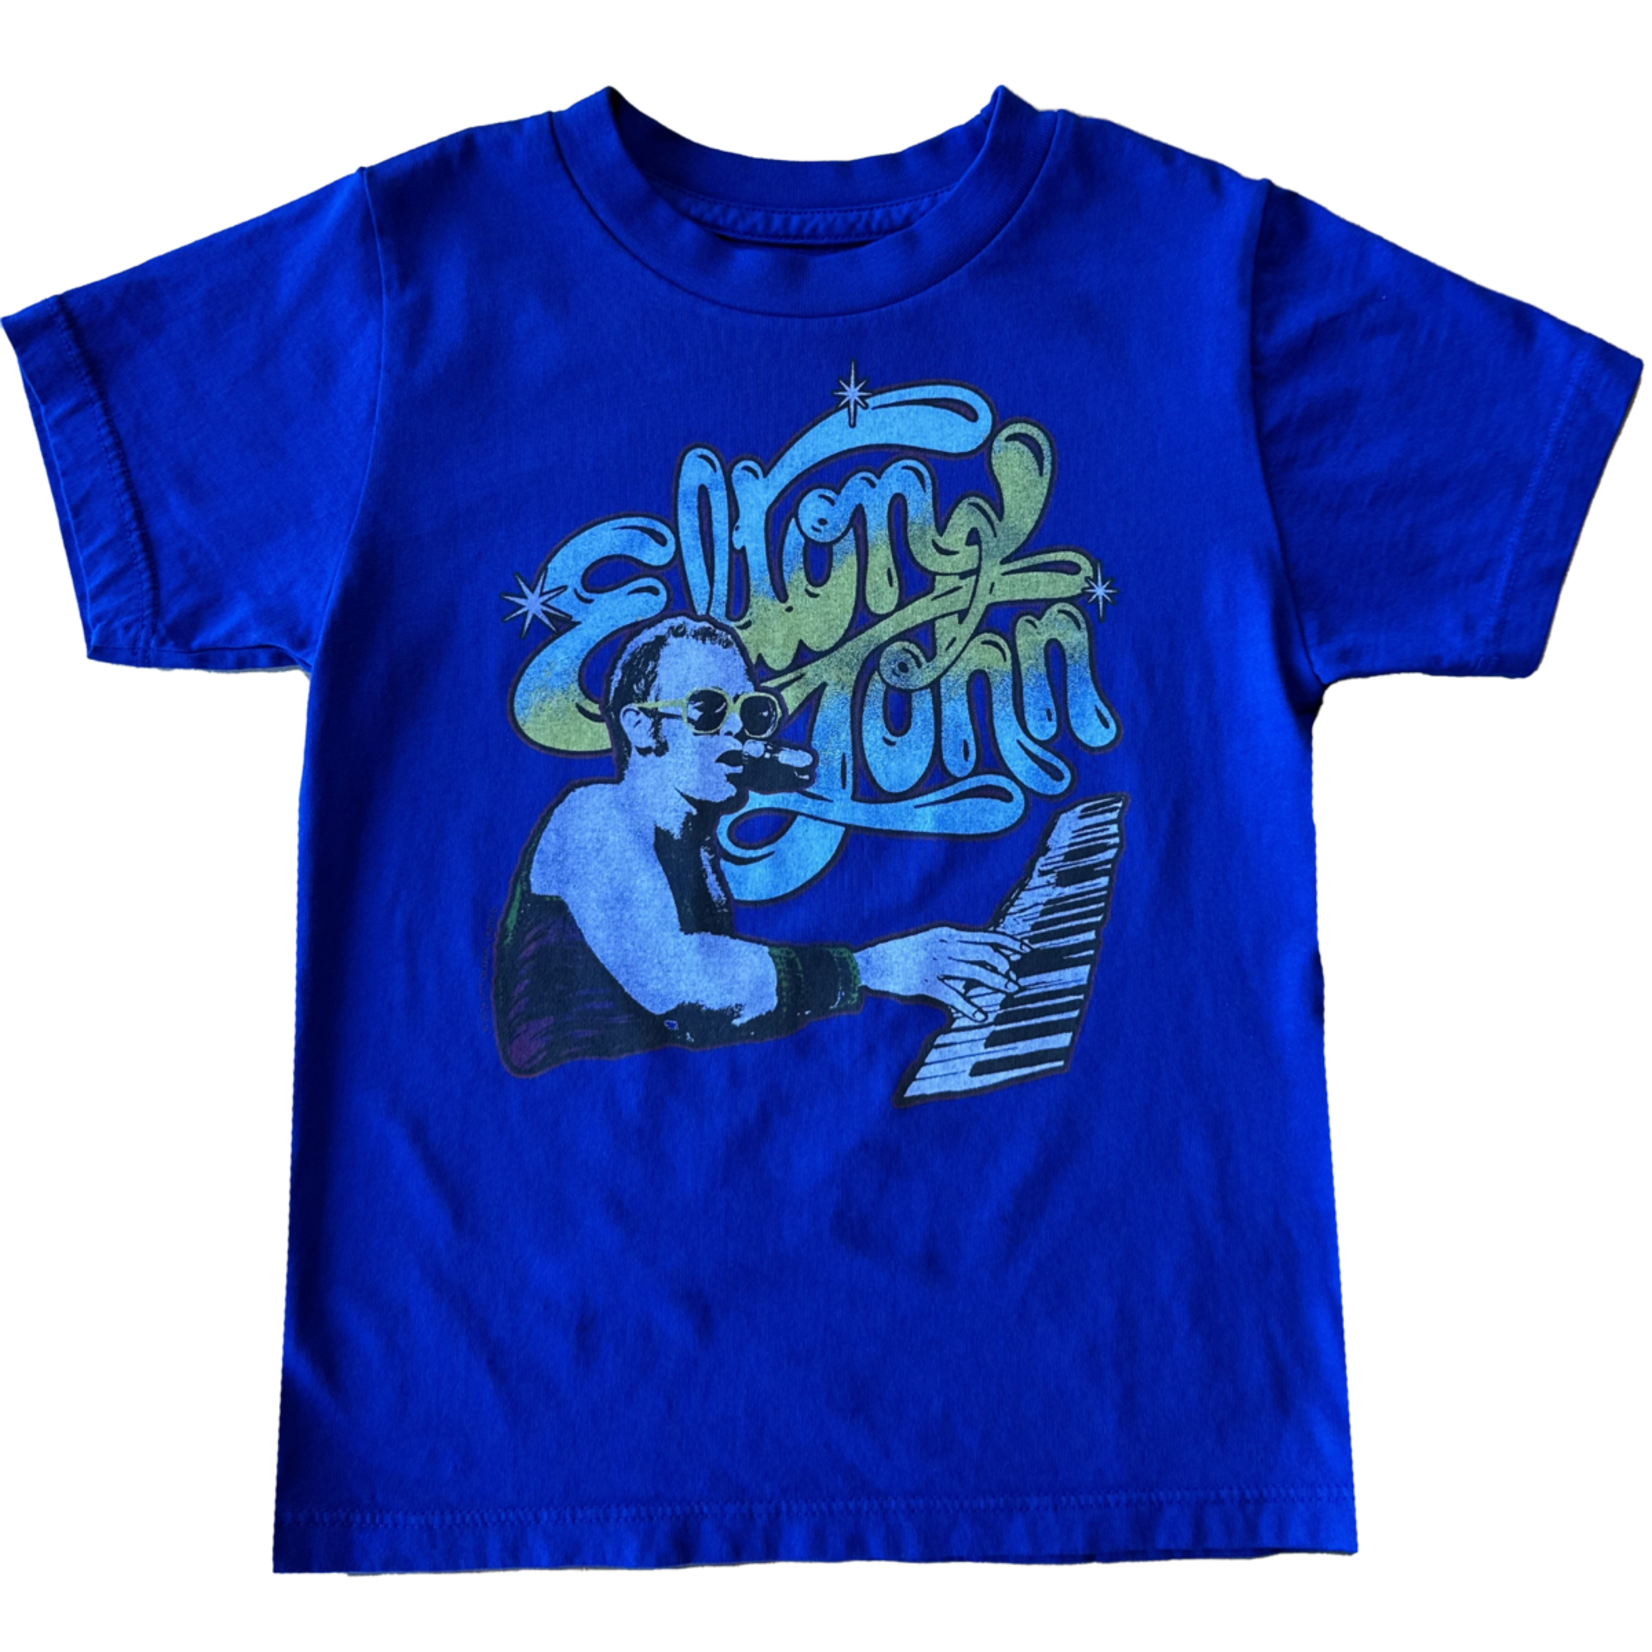 Rowdy Sprout Rowdy Sprout Tangled Up In Blue Elton John S/S Tee